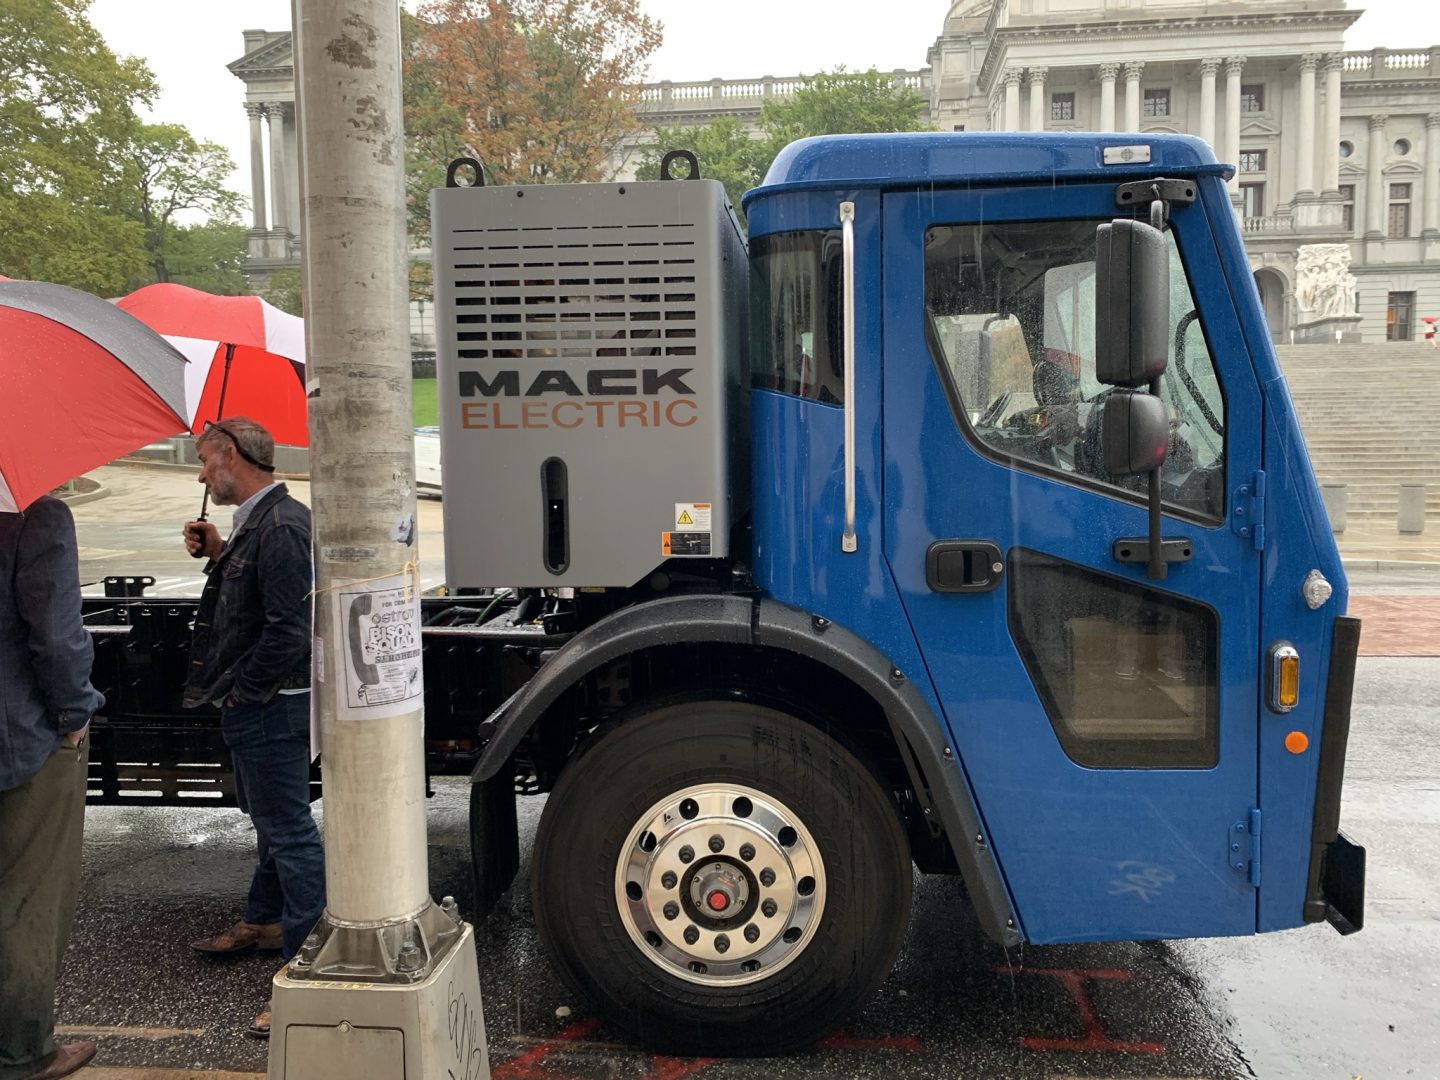 A Mack LR Electric refuse truck is parked outside the state capitol on Sept. 28, 2021.